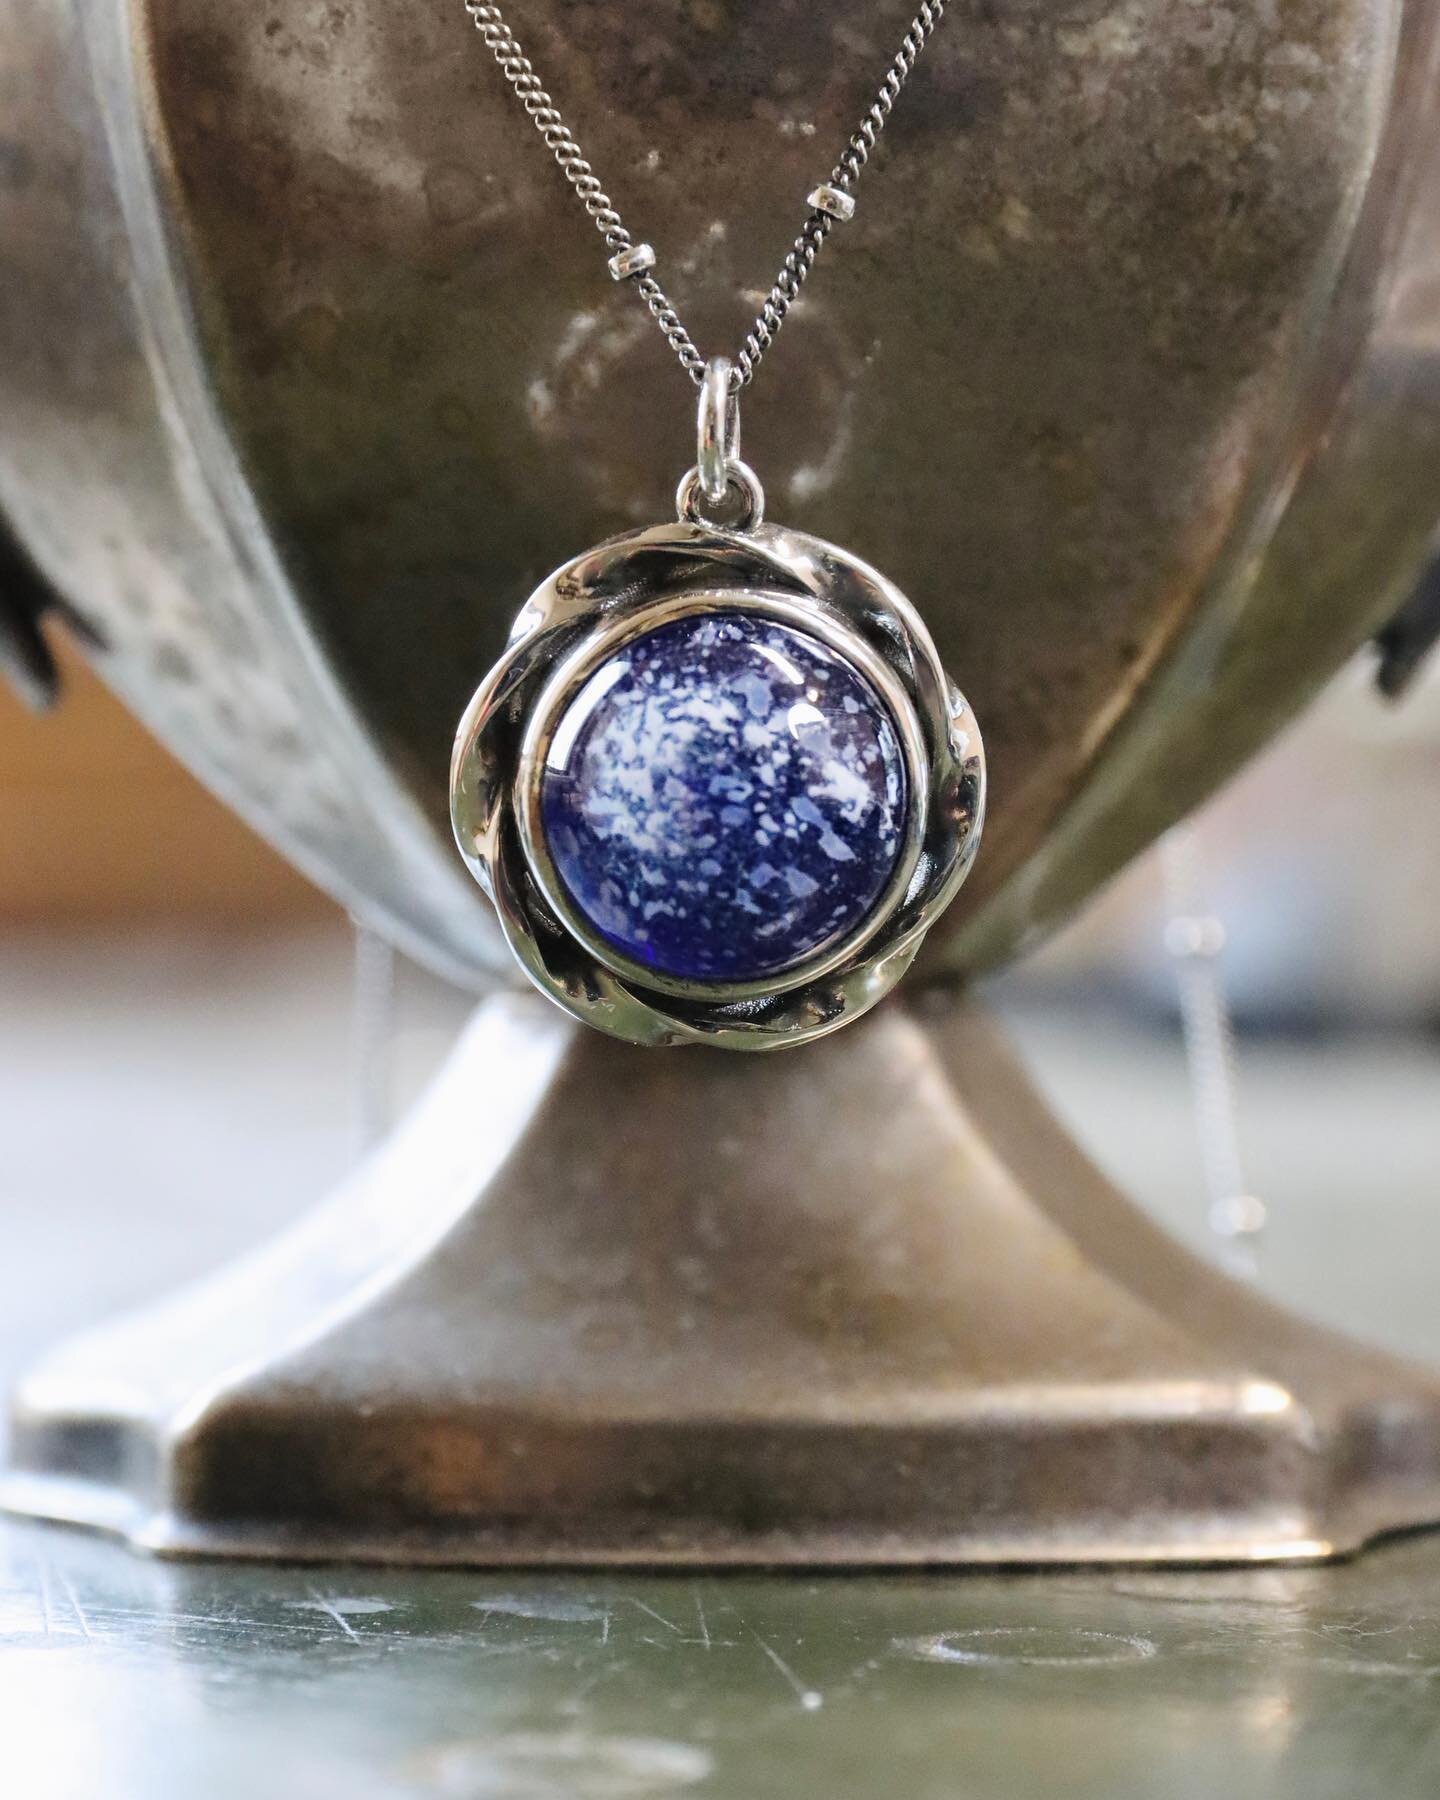 That soft patina finish. 😍 #oldworldcharm #tomorrowsheirlooms 
.
.
.
.
#cremationjewelry #celebratelife #honor #memorial #loss #love #grief #griefjourney #griefawareness #griefsupport #mourningjewelry #cremation #urn #remembrance #neverforget #sympa